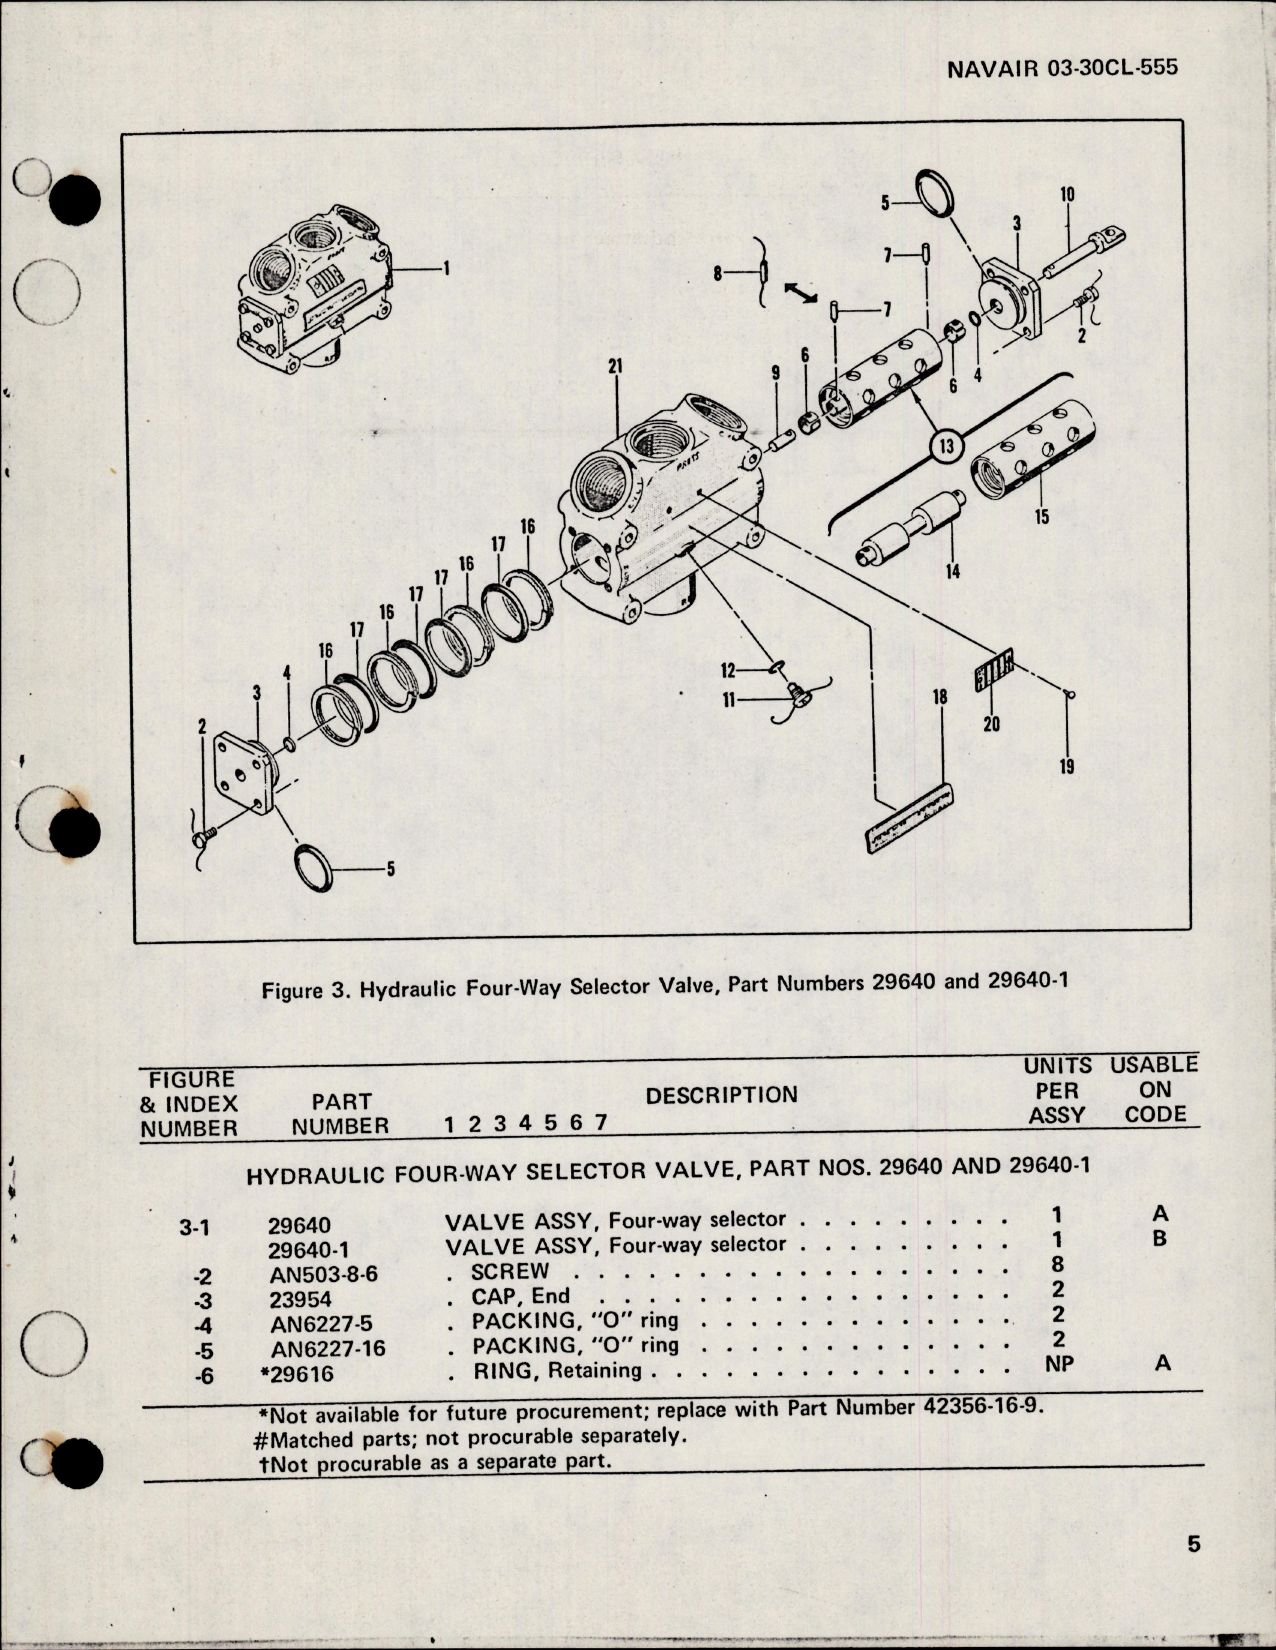 Sample page 5 from AirCorps Library document: Overhaul Instructions with Parts for Hydraulic Four way Selector Valve - Parts 29640 and 296401-1 